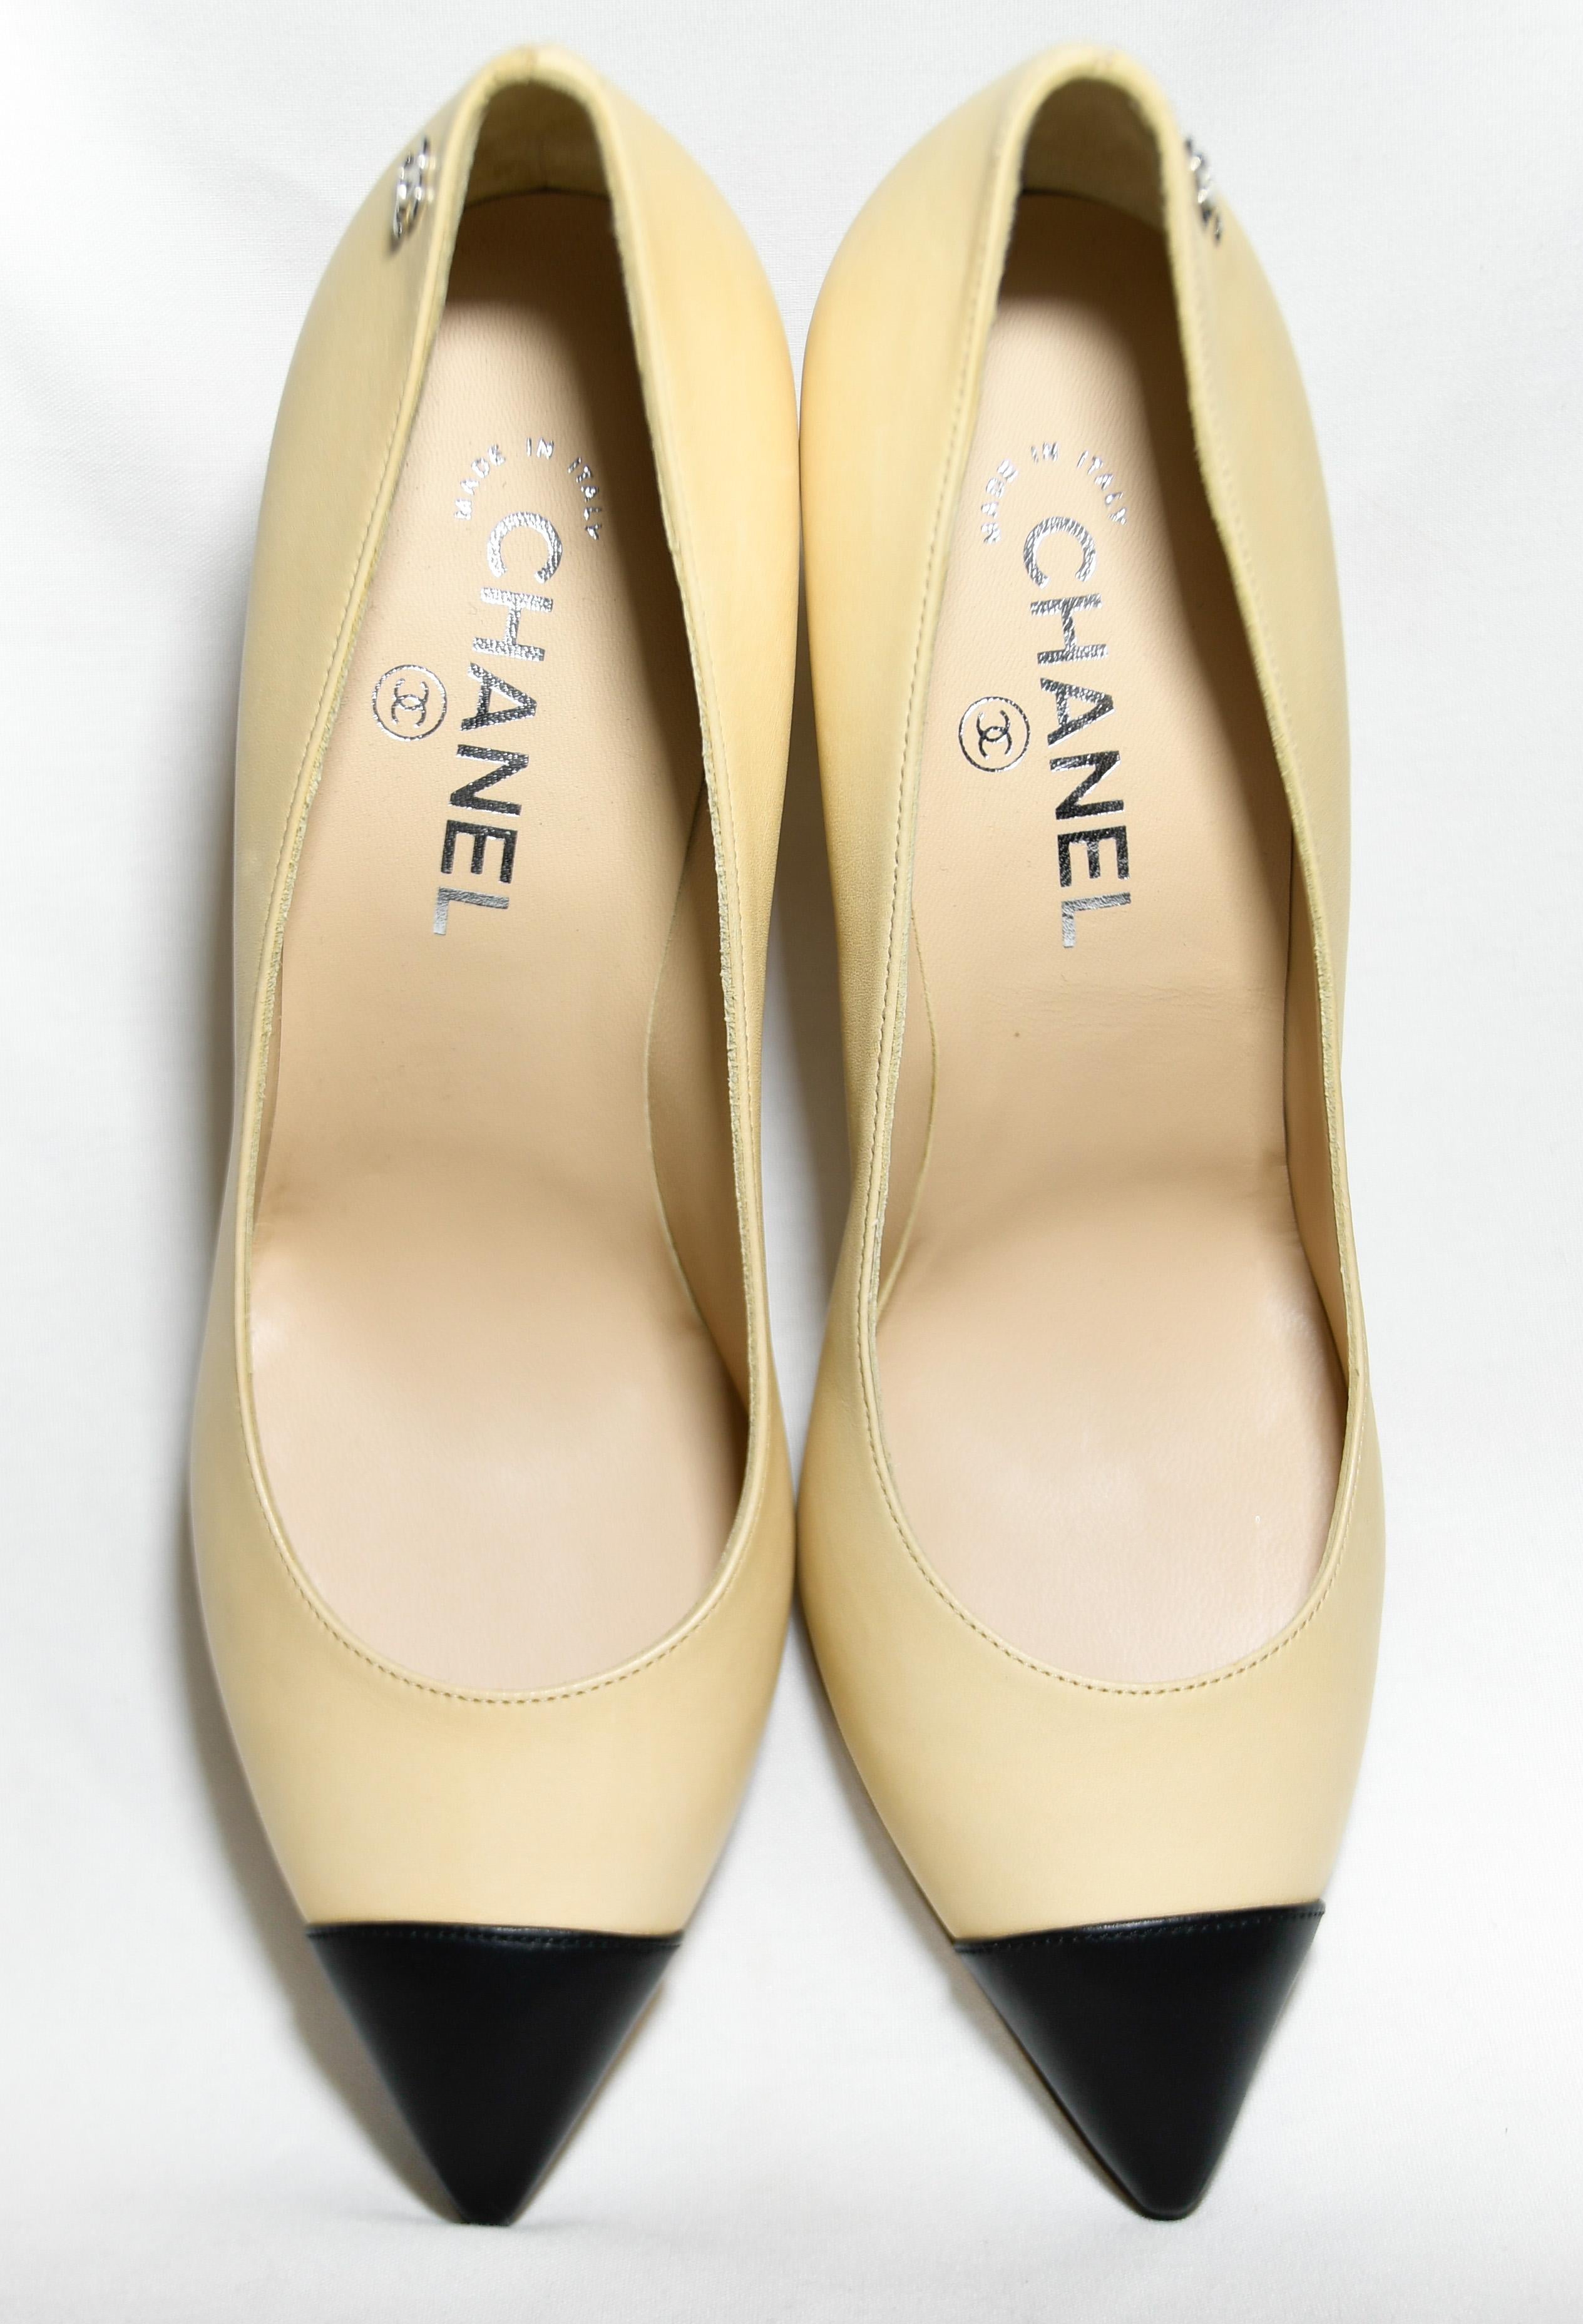 Chanel Cap Toe Pumps Beige and Black with CC  Back Heels In Excellent Condition For Sale In Palm Beach, FL